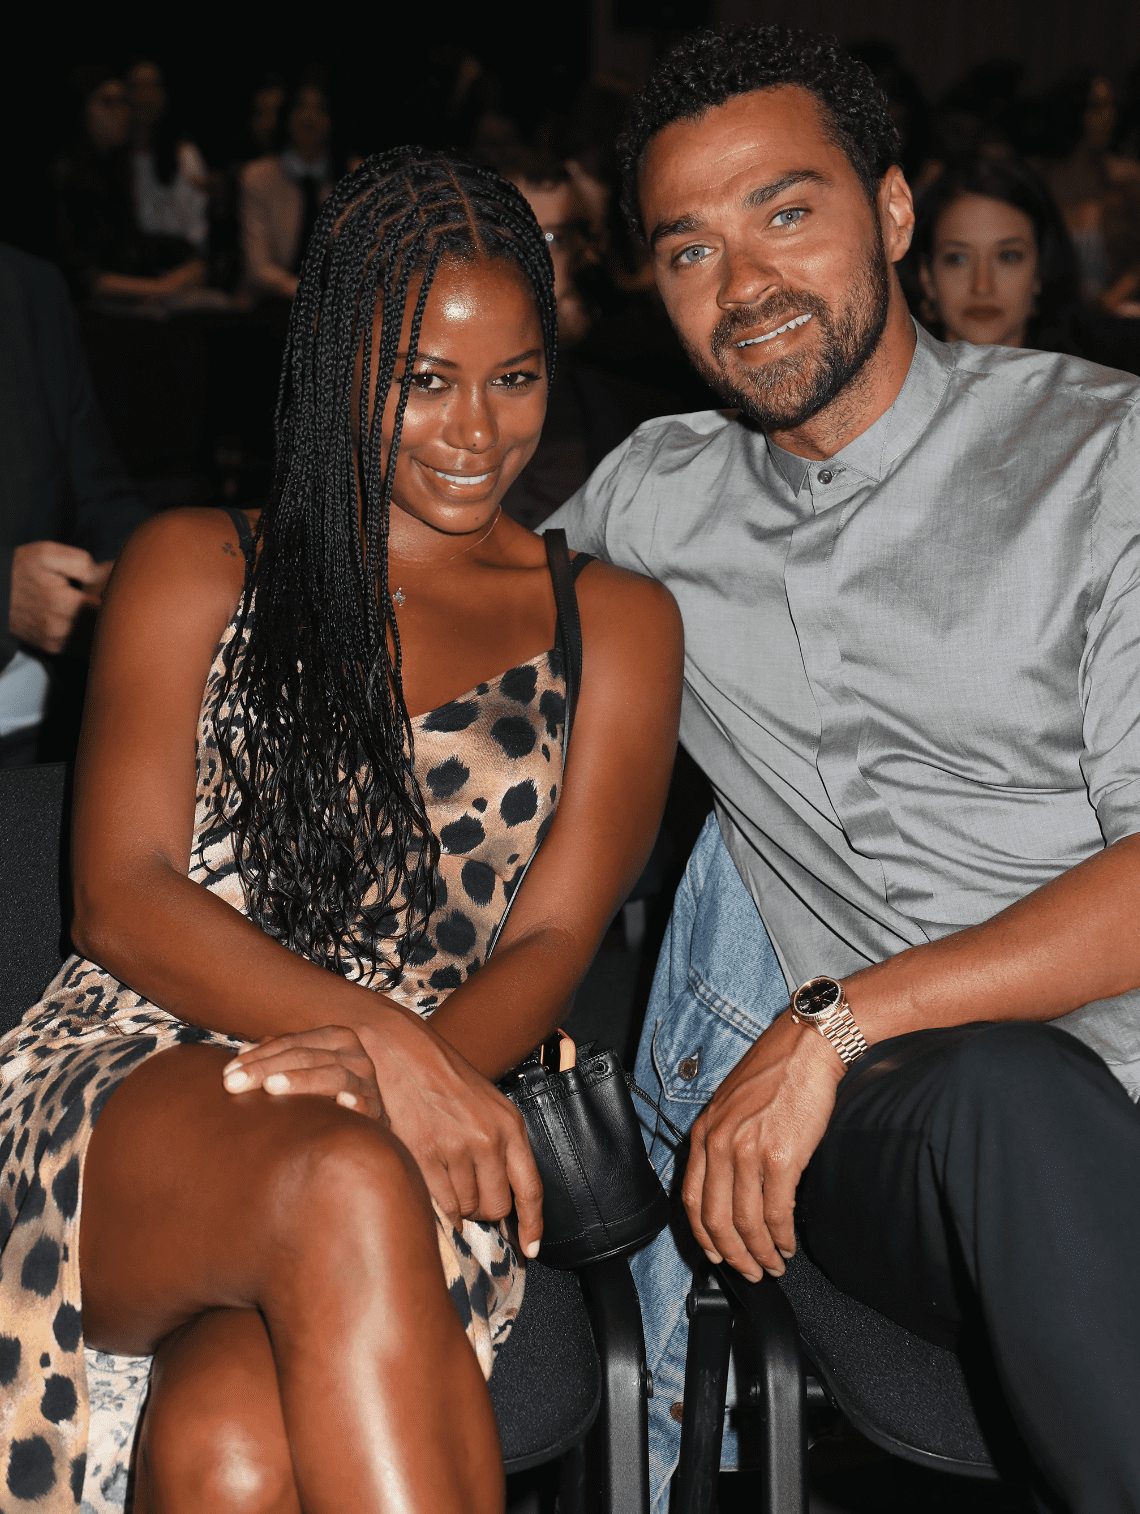 Taylour Paige and Jesse Williams attend the Filming Italy Sardegna Festival 2019 Day 2 at Forte Village Resort on June 14, 2019 in Cagliari, Italy. | Source: Getty Images